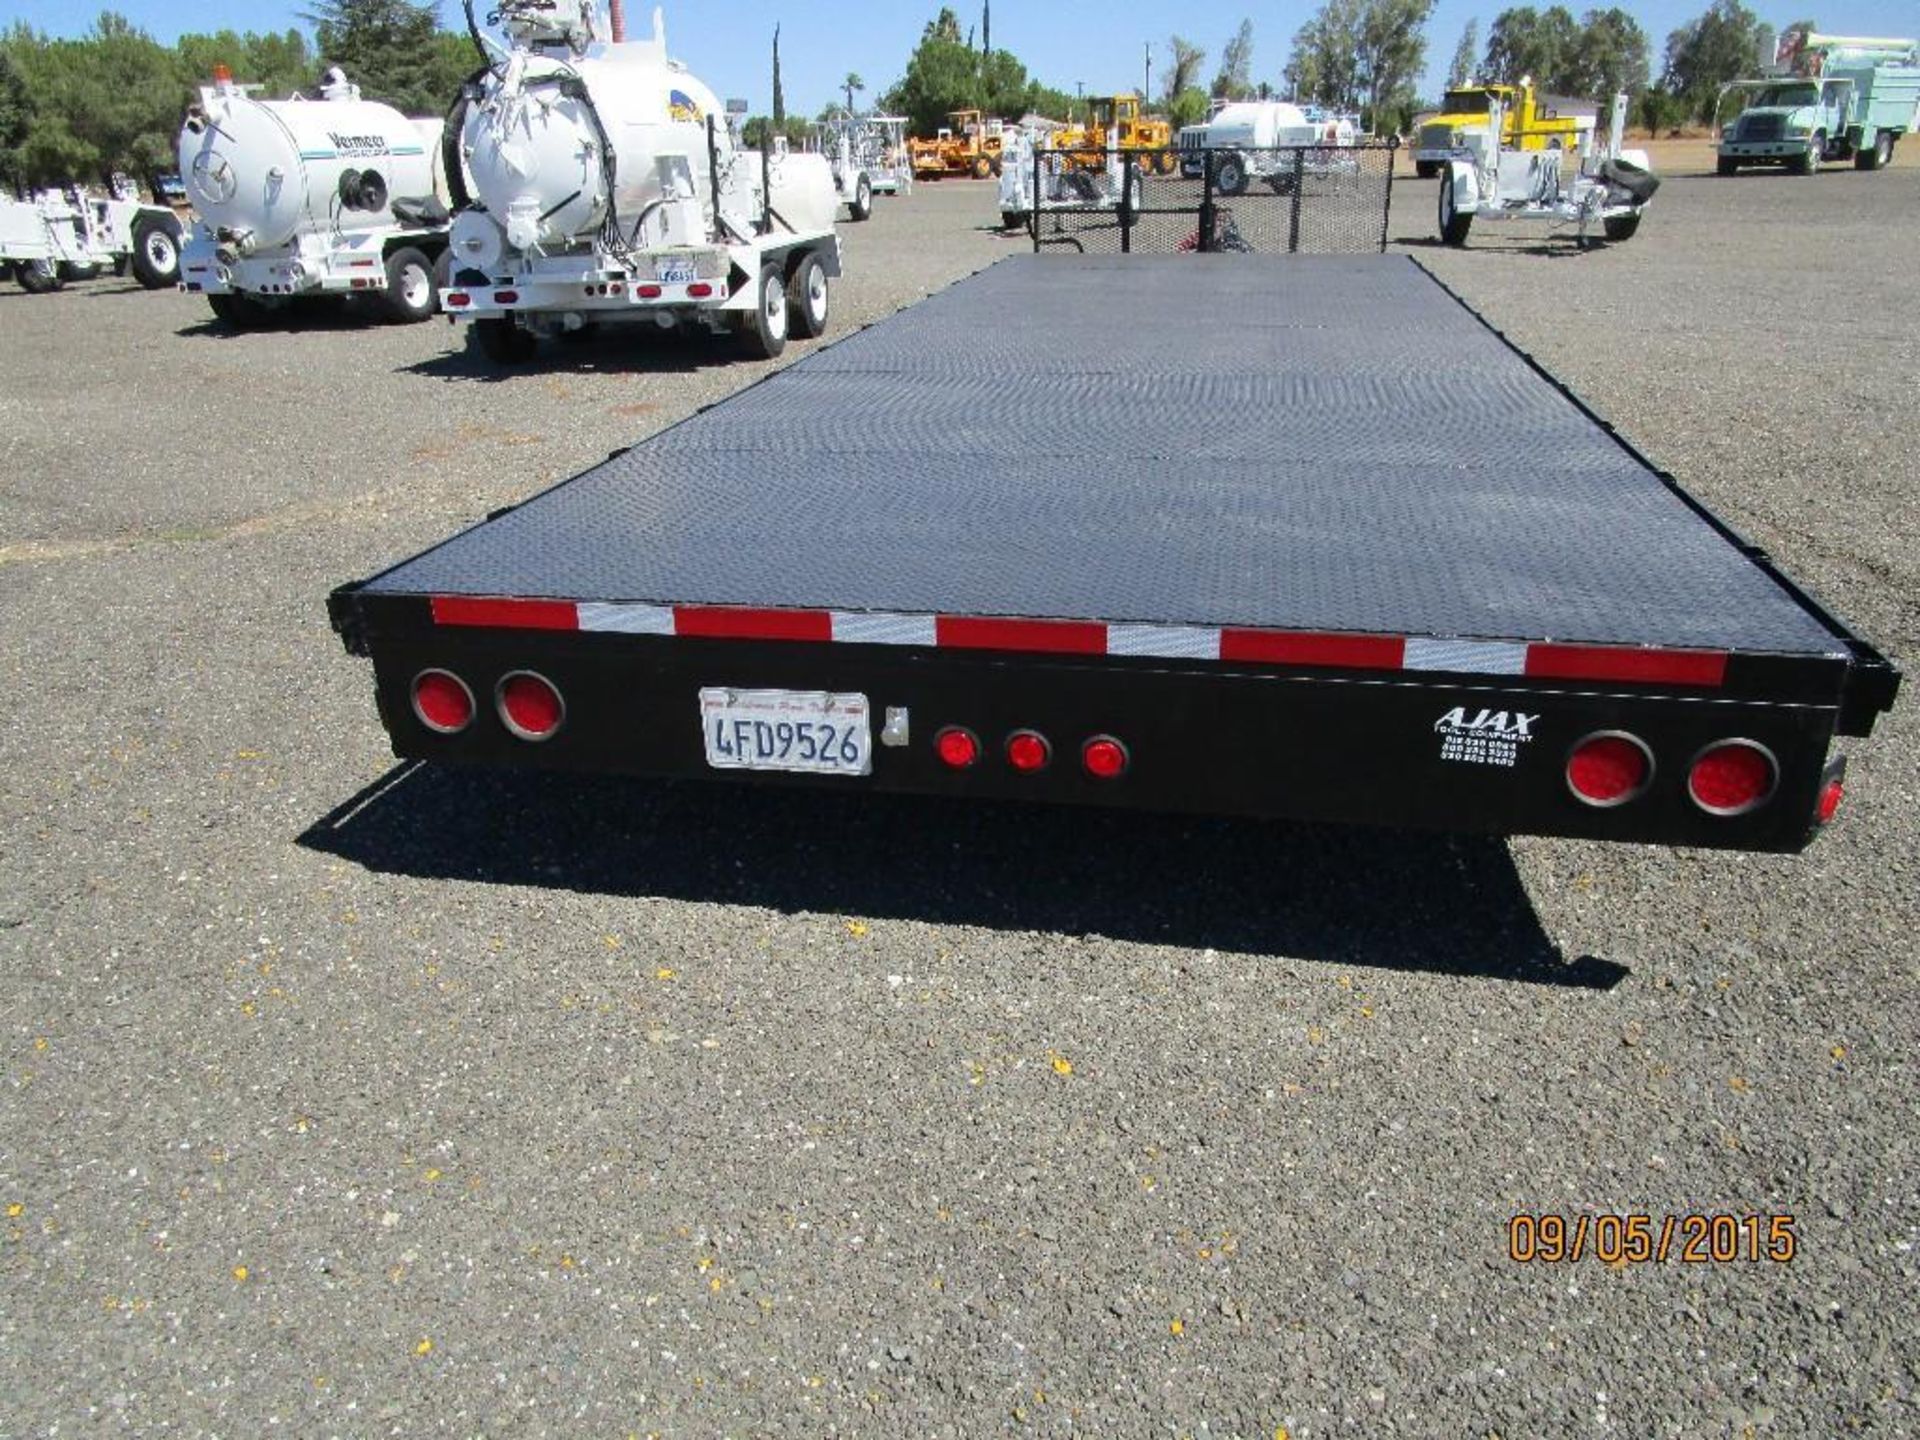 24'x102" Flatbed Trailer  VIN# 1B9H24201B1031523  Plate# 4FD9526  GVWR - 24,000 lbs  Pintle Hitch - Image 6 of 8